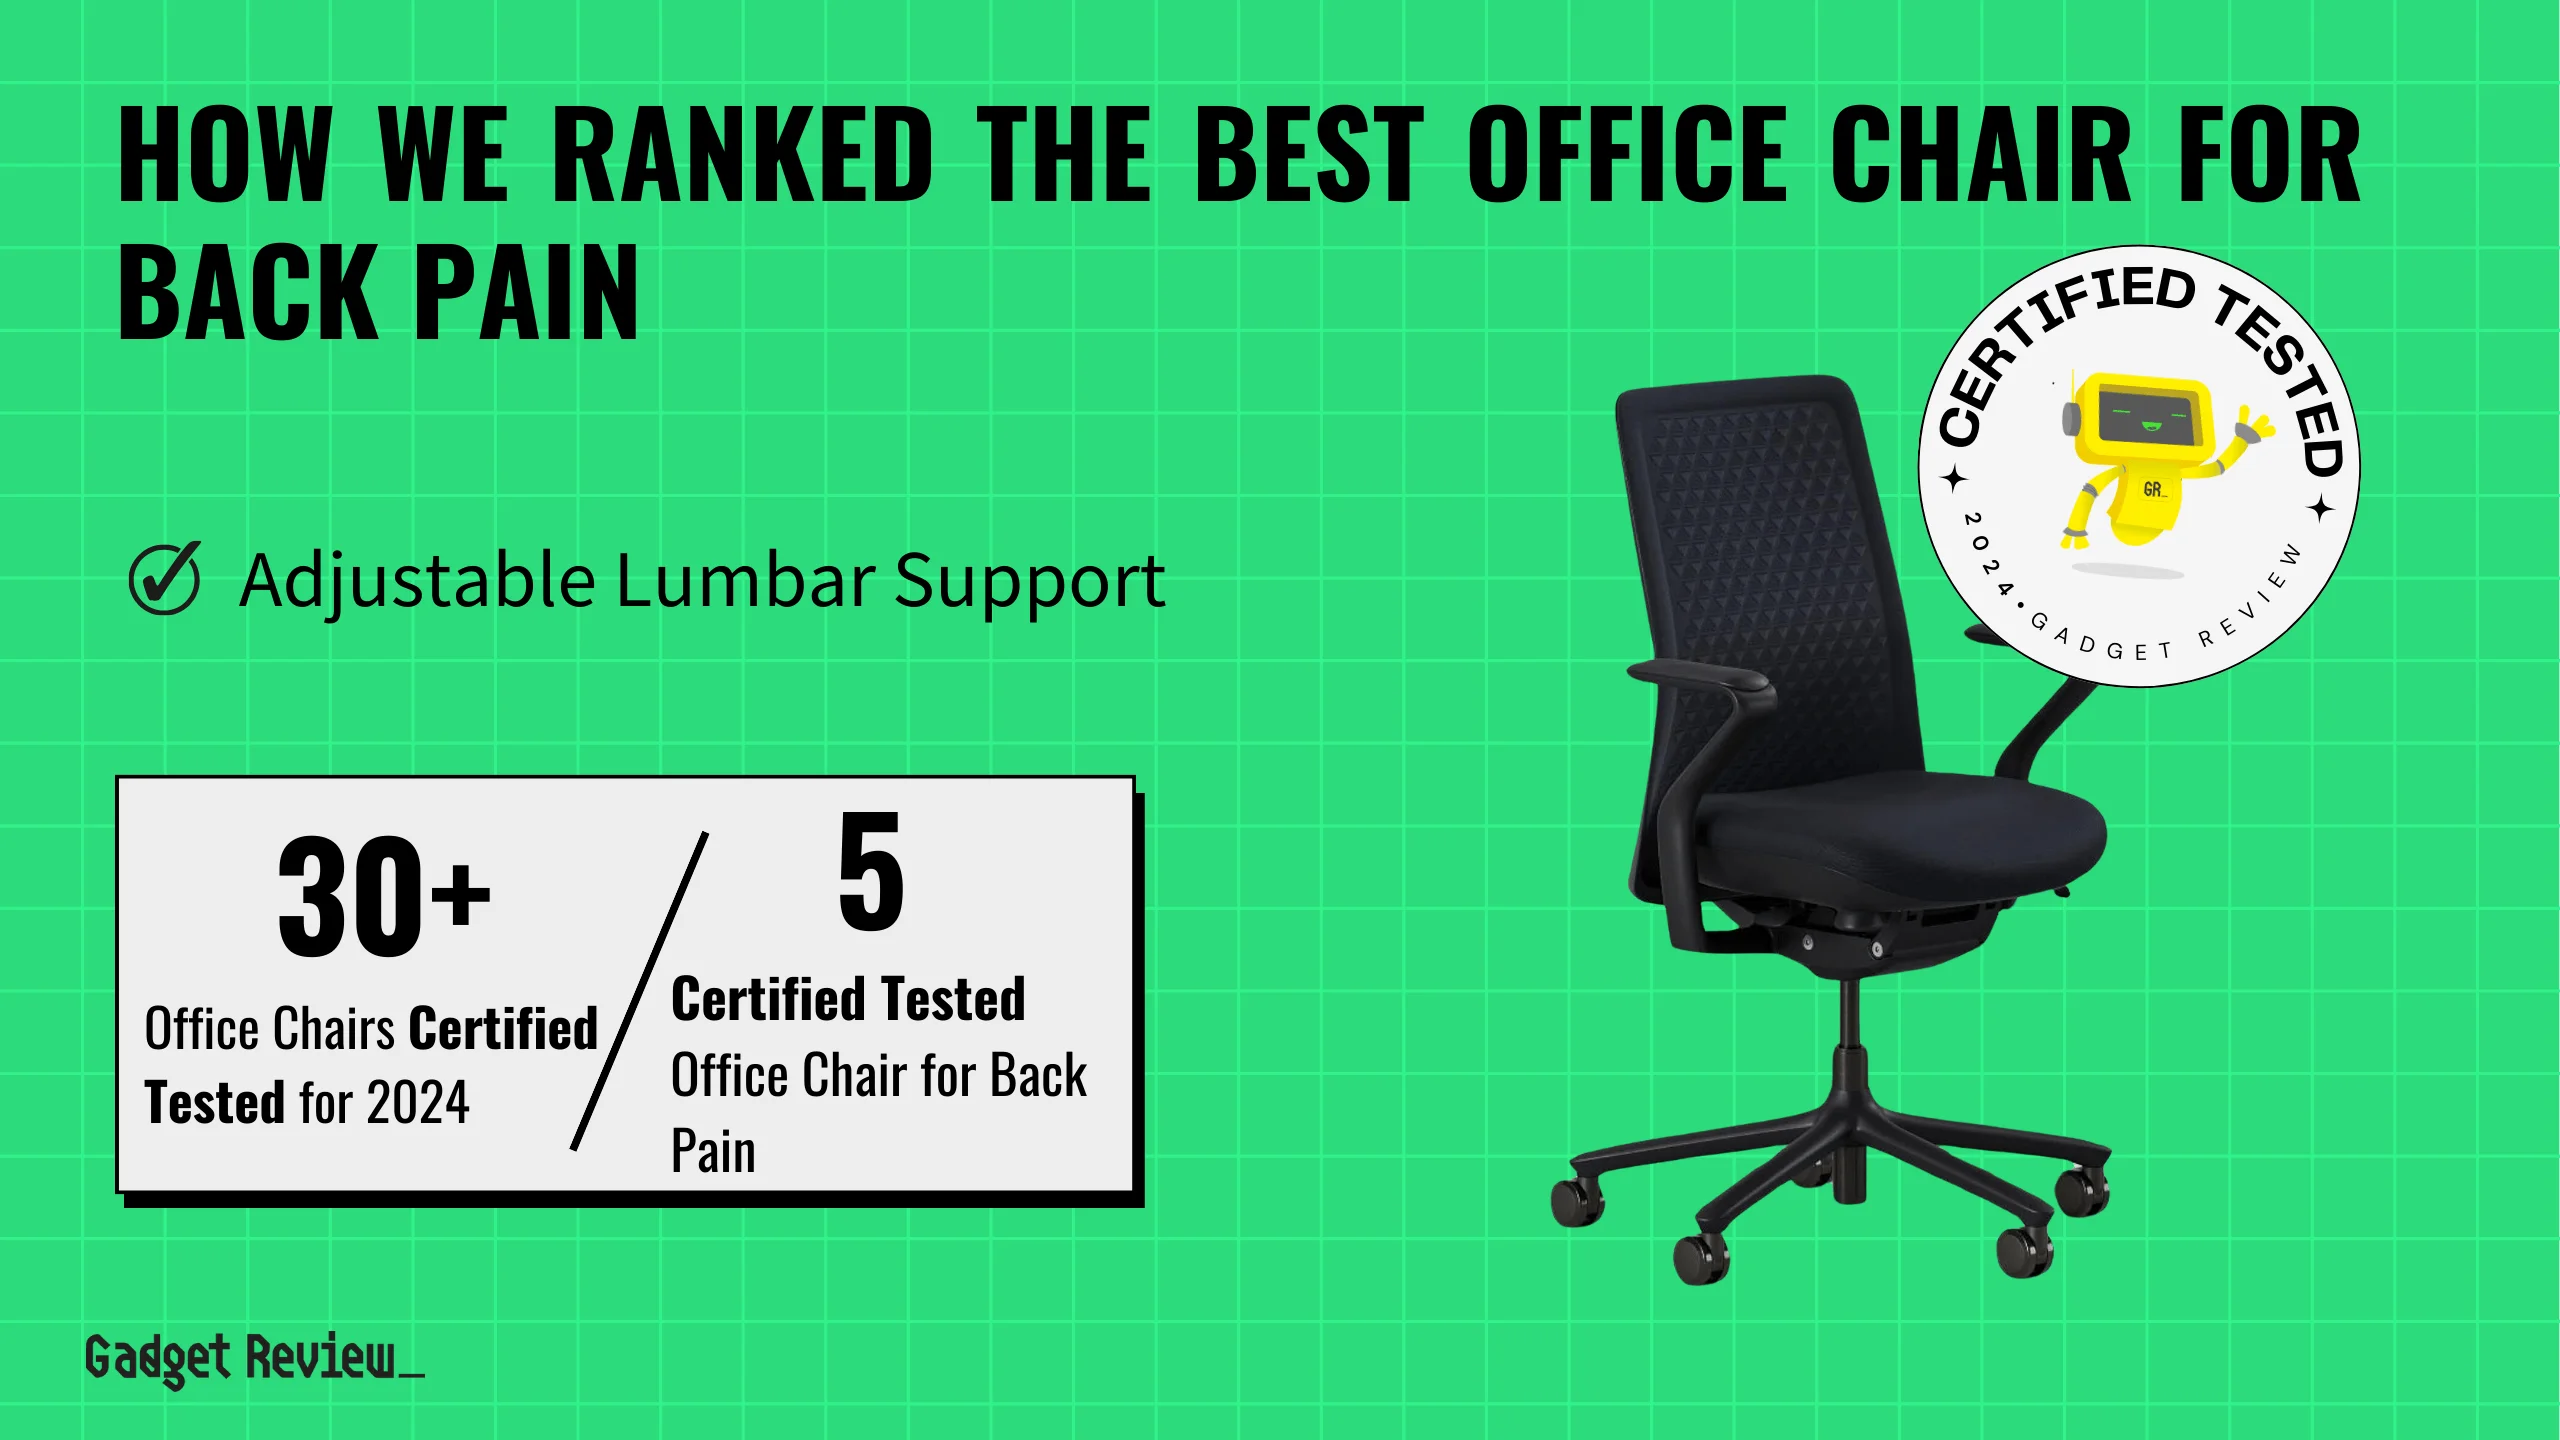 best office chair back pain guide that shows the top best office chair model